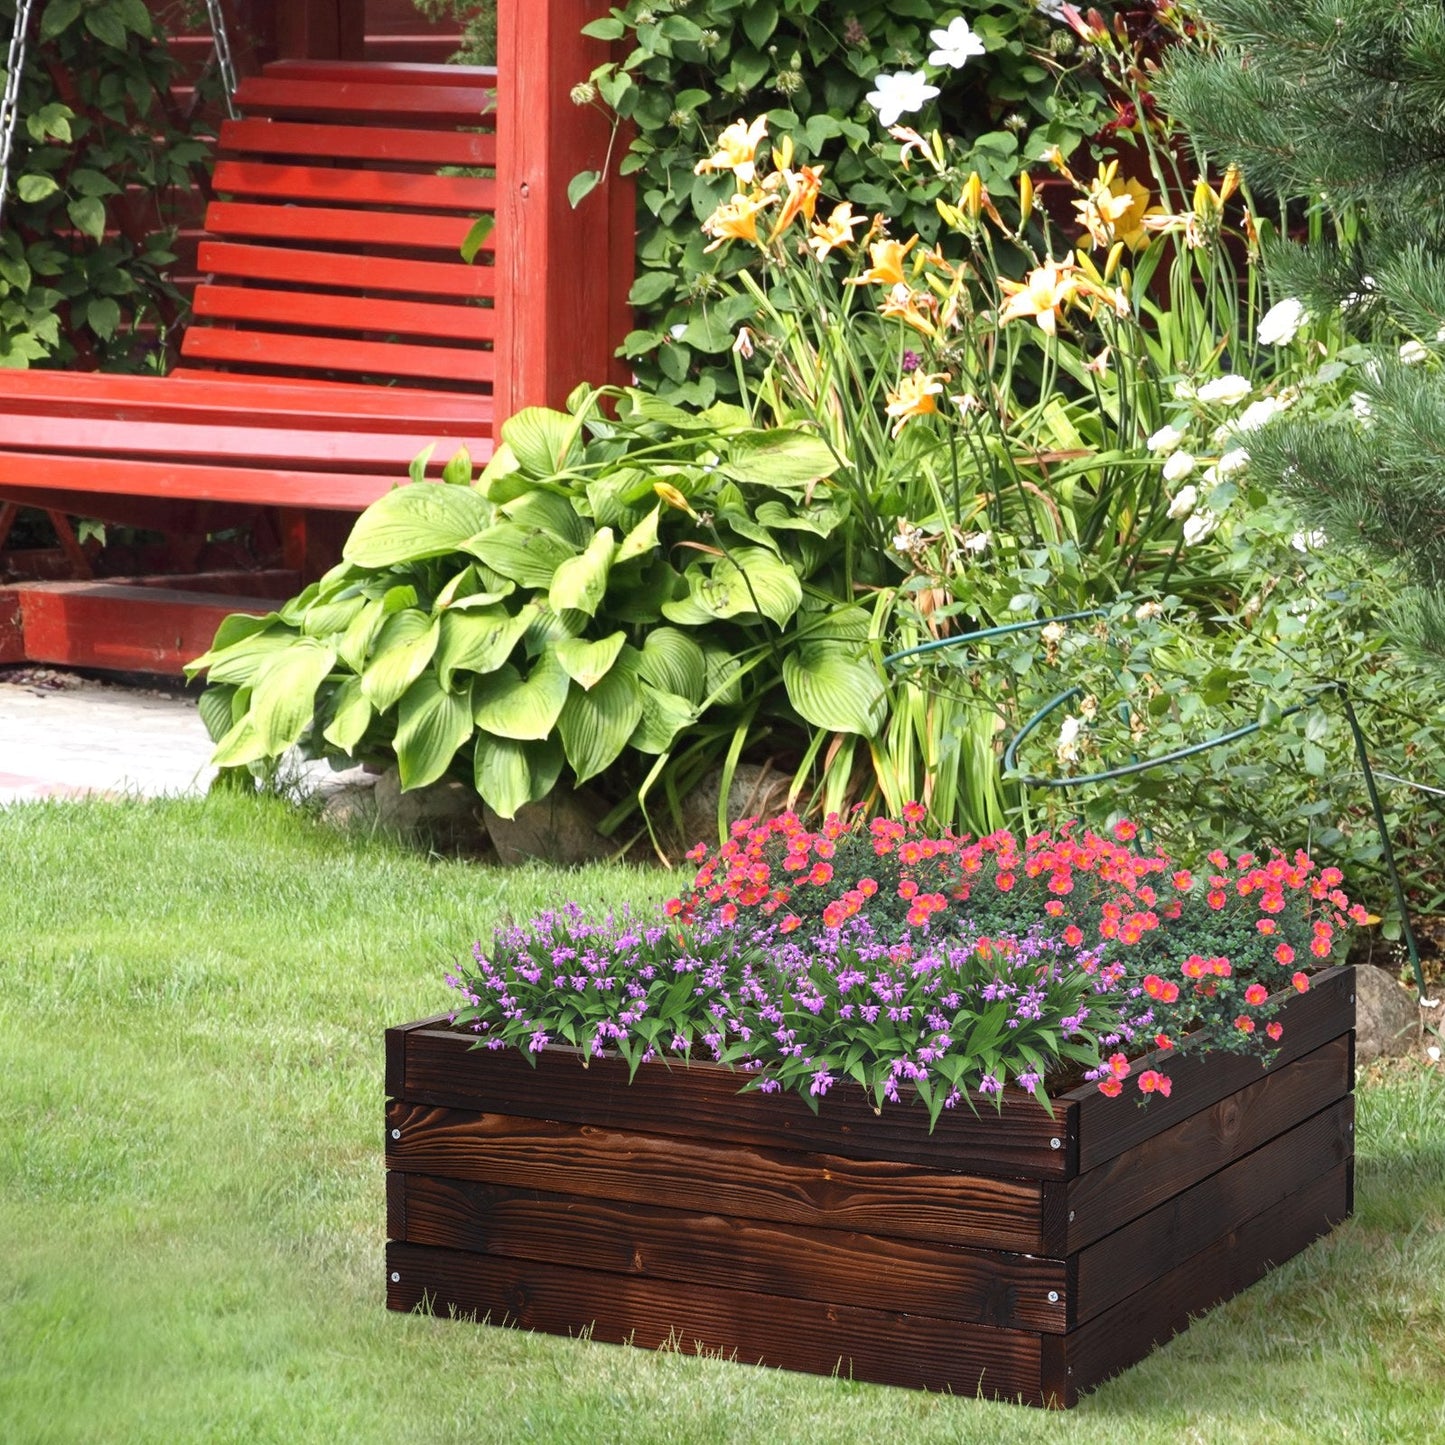 Raised Garden Bed Elevated Wooden Planter Box for Backyard, Patio to Grow Vegetables, Herbs, and Flowers at Gallery Canada